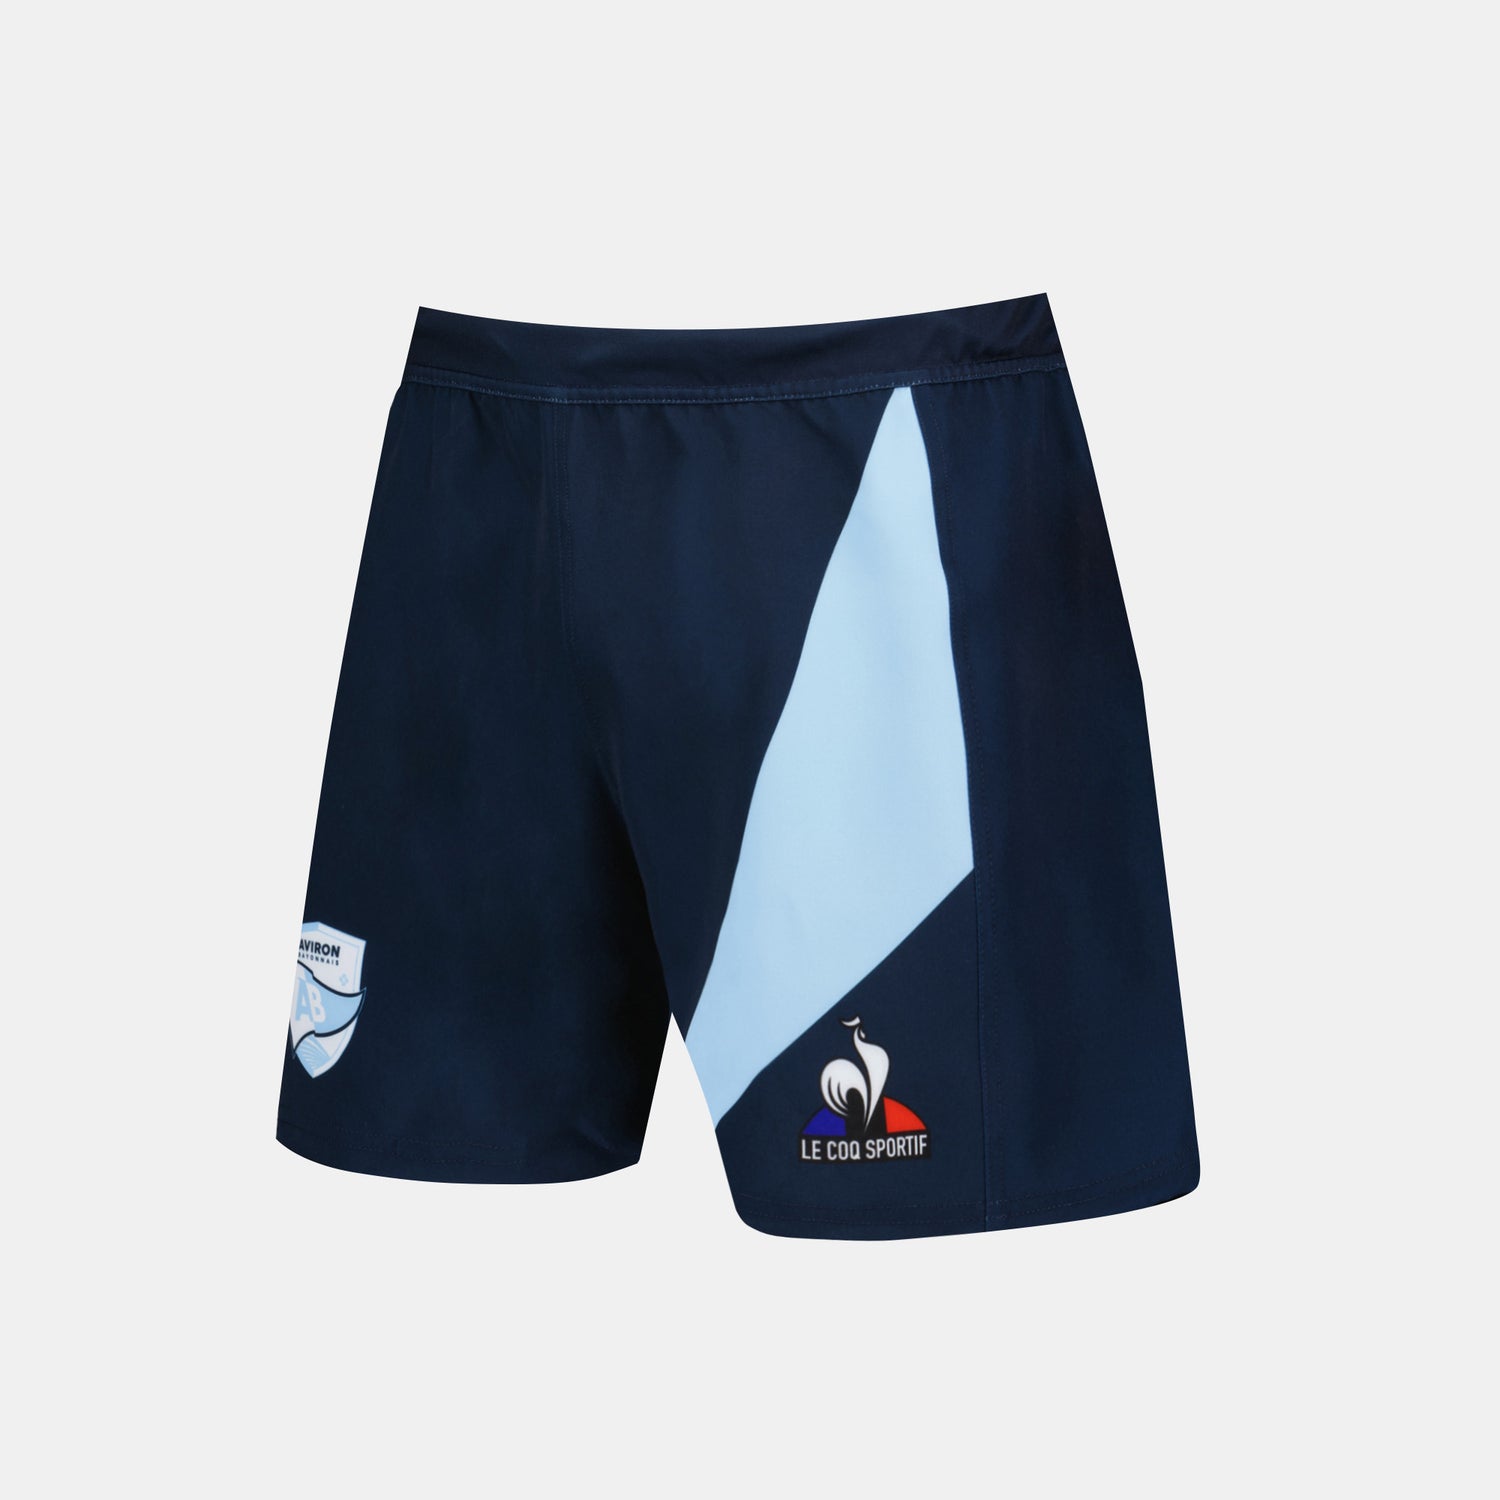 2320316-AB SHORT Rugby M blue navy/fly blue  | Pantalones Cortos Hombre